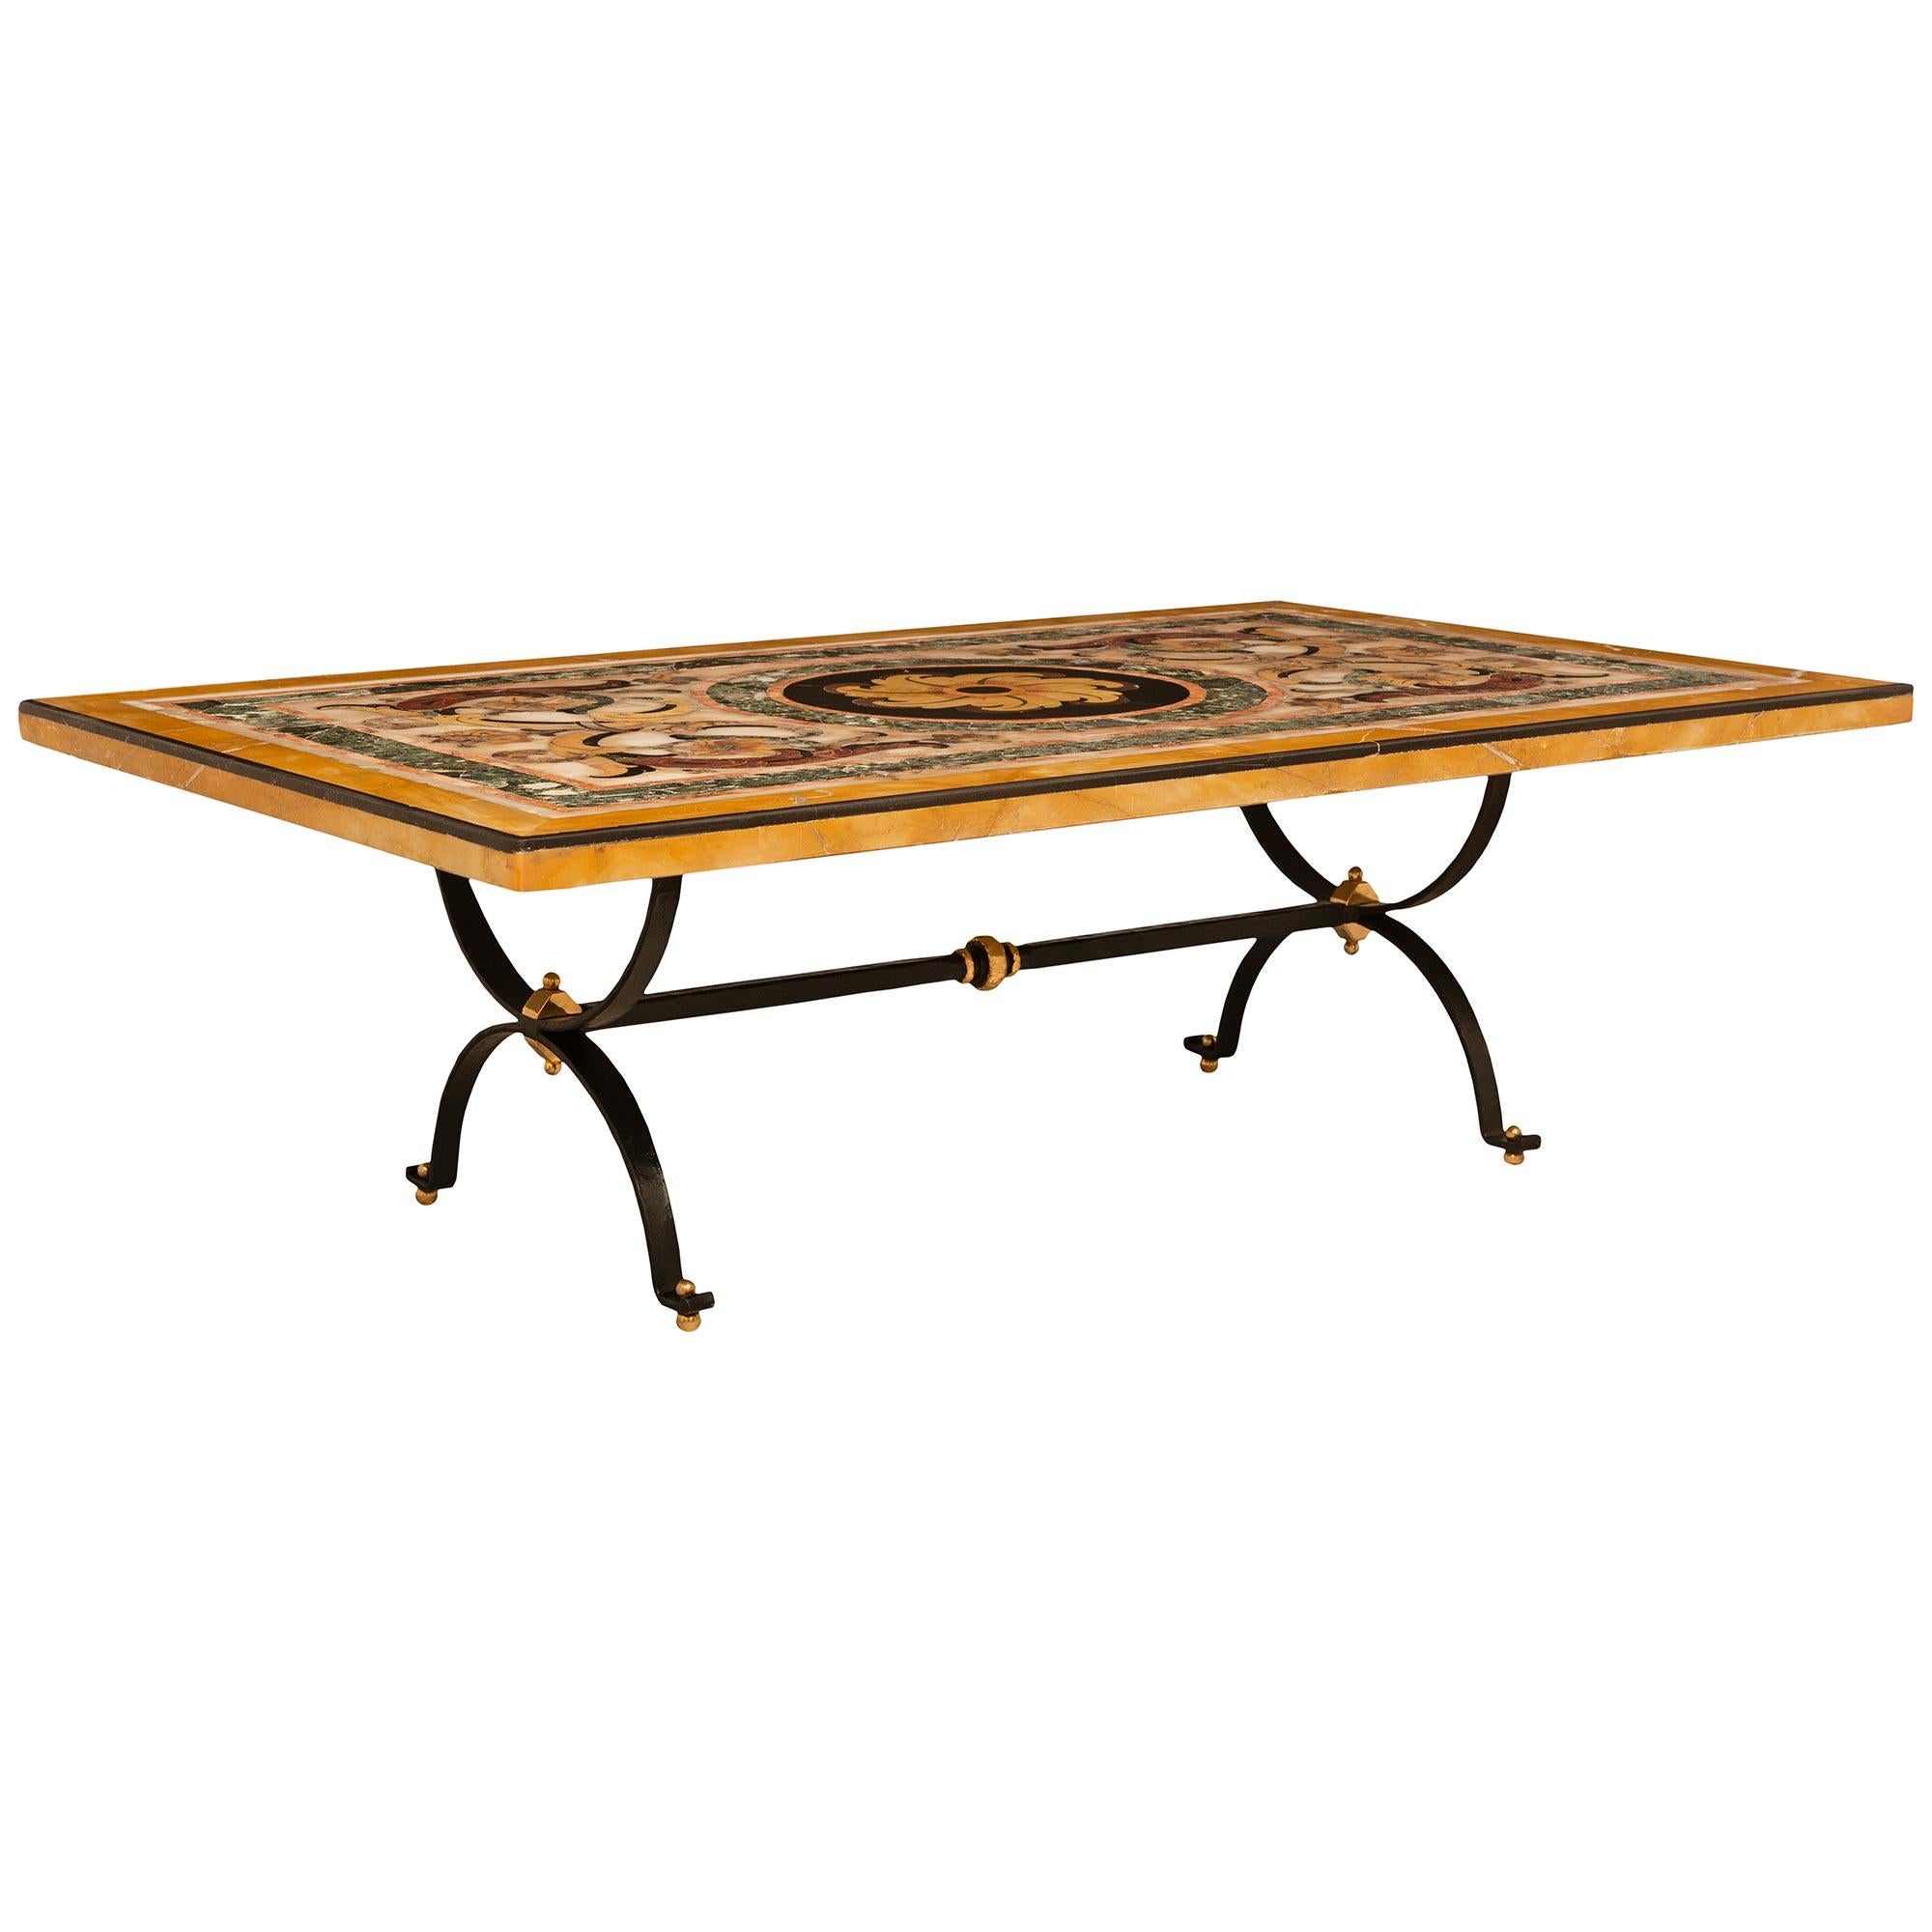 Italian 18th Century Pietra Dura Marble, Wrought Iron And Brass Coffee Table In Good Condition For Sale In West Palm Beach, FL